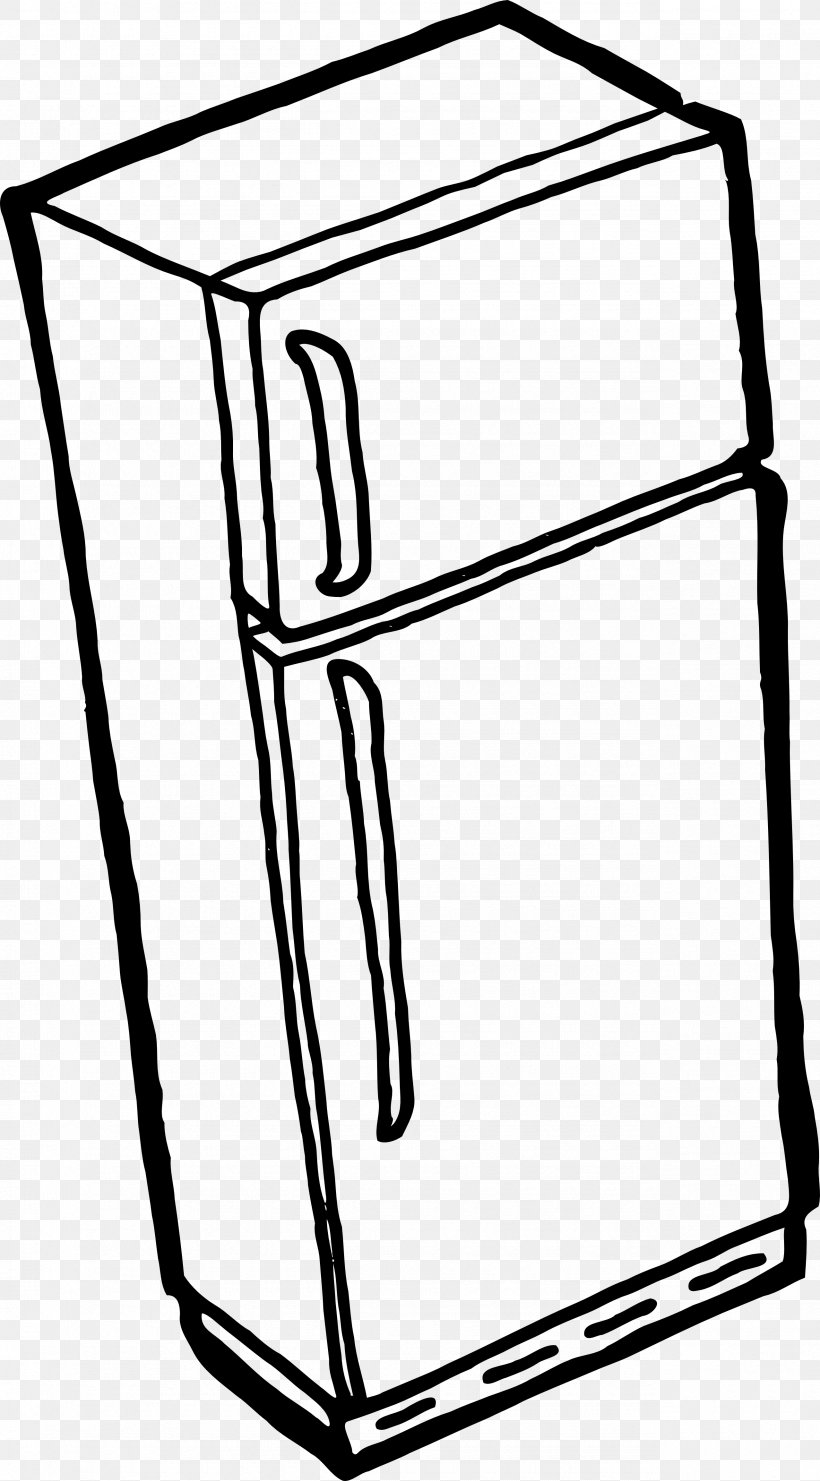 Refrigerator Home Appliance Clip Art, PNG, 2555x4617px, Refrigerator, Area, Black, Black And White, Freezers Download Free